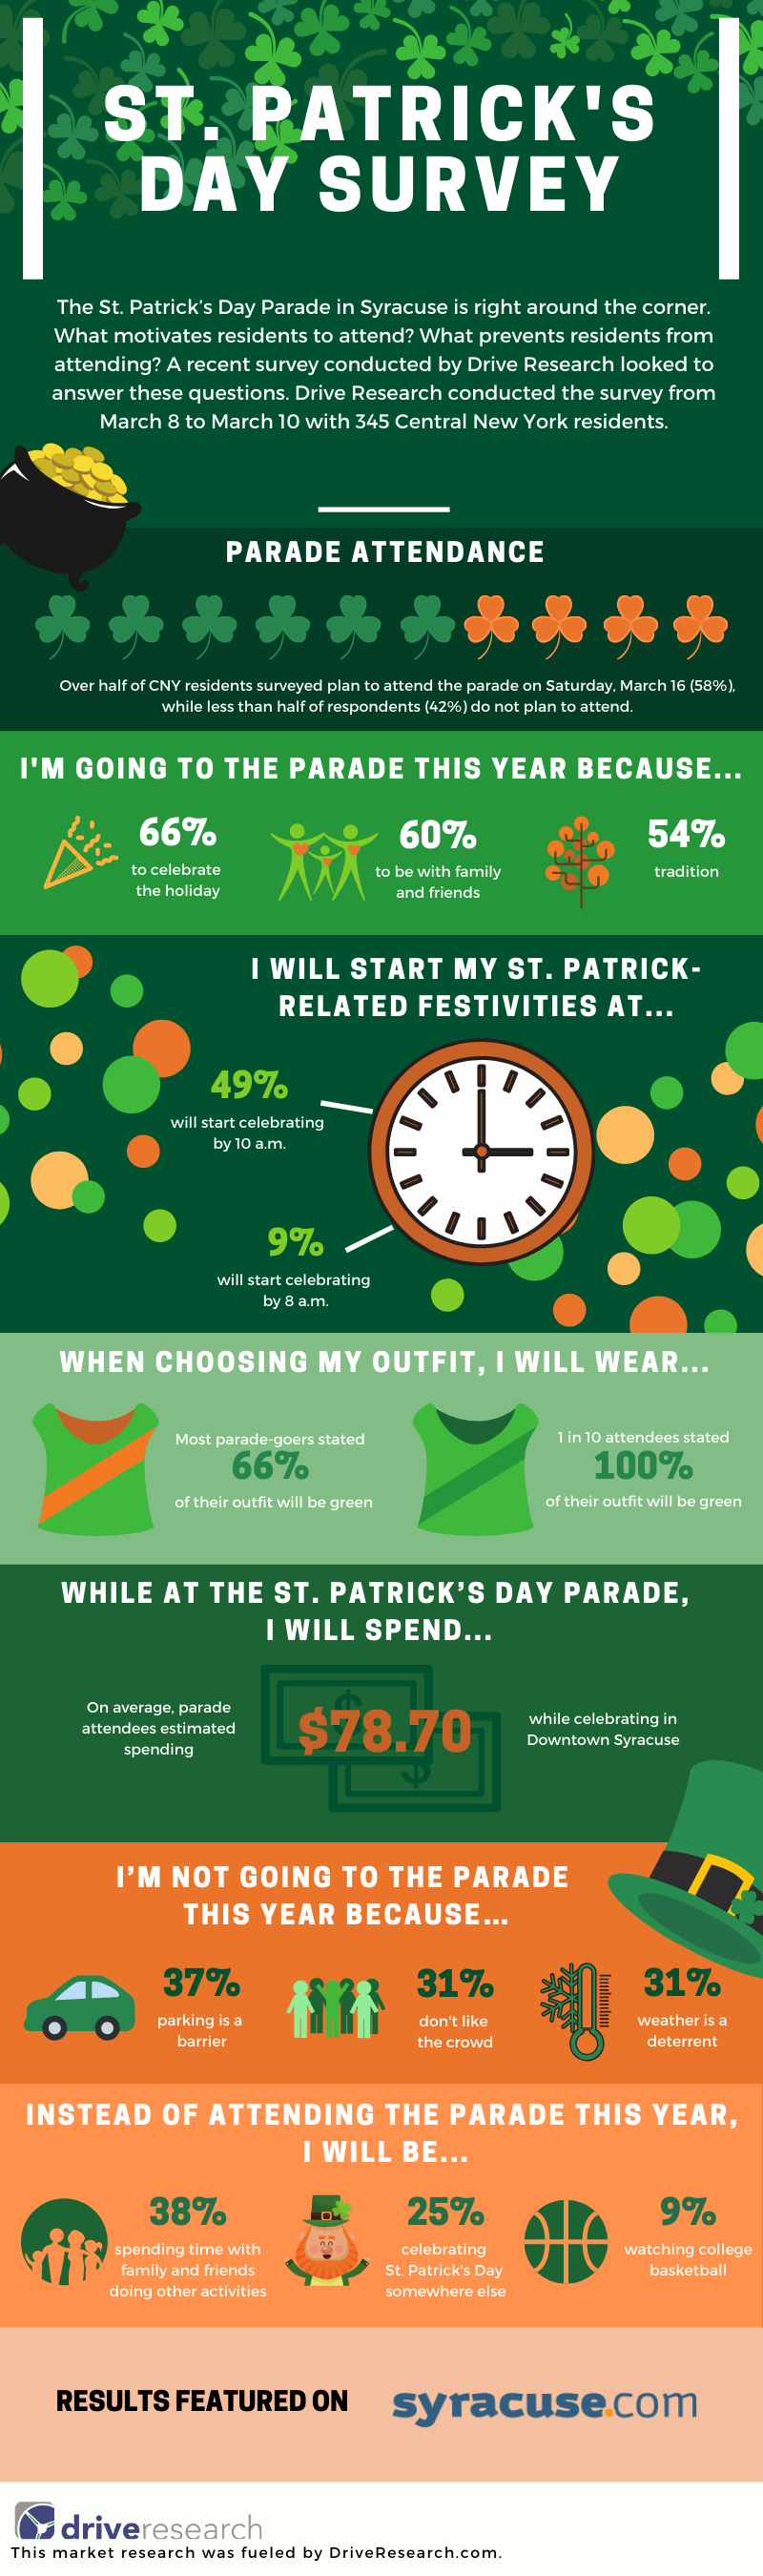 Top 10 Findings from the Central New York St. Patrick’s Day Parade Survey Inforgraphic